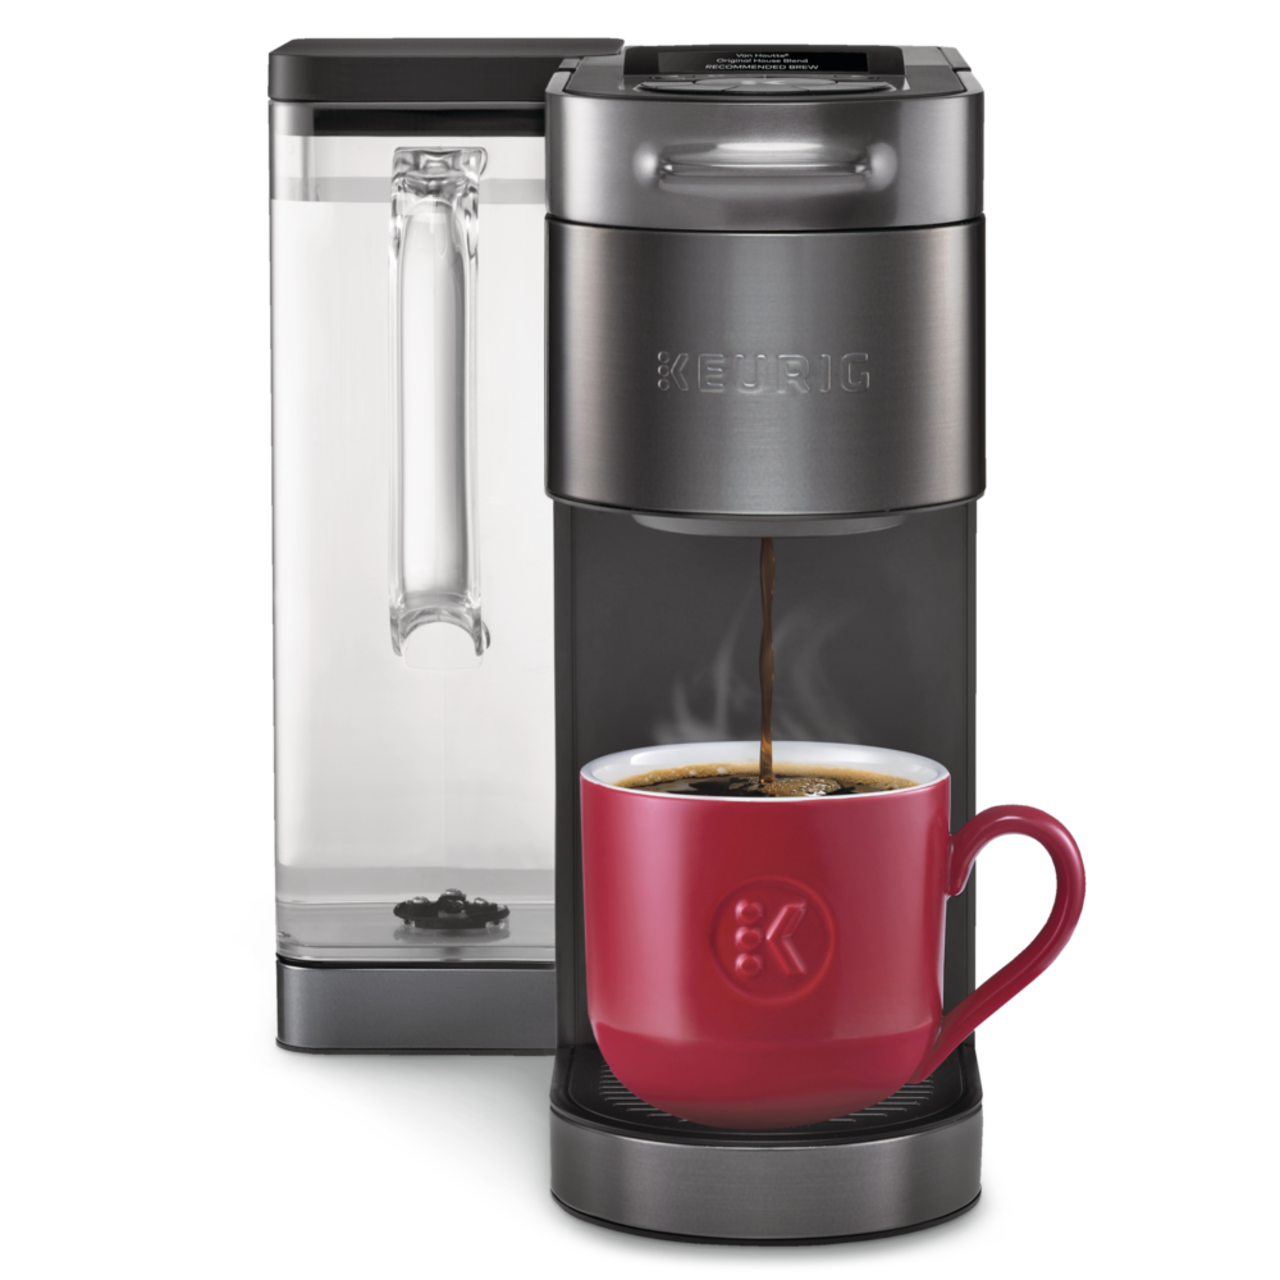 https://media-www.canadiantire.ca/product/living/kitchen/kitchen-appliances/0430787/keurig-k-supreme-plus-smart-d602563a-1b45-4ba5-8ff5-a35d29cf45eb.png?imdensity=1&imwidth=640&impolicy=mZoom